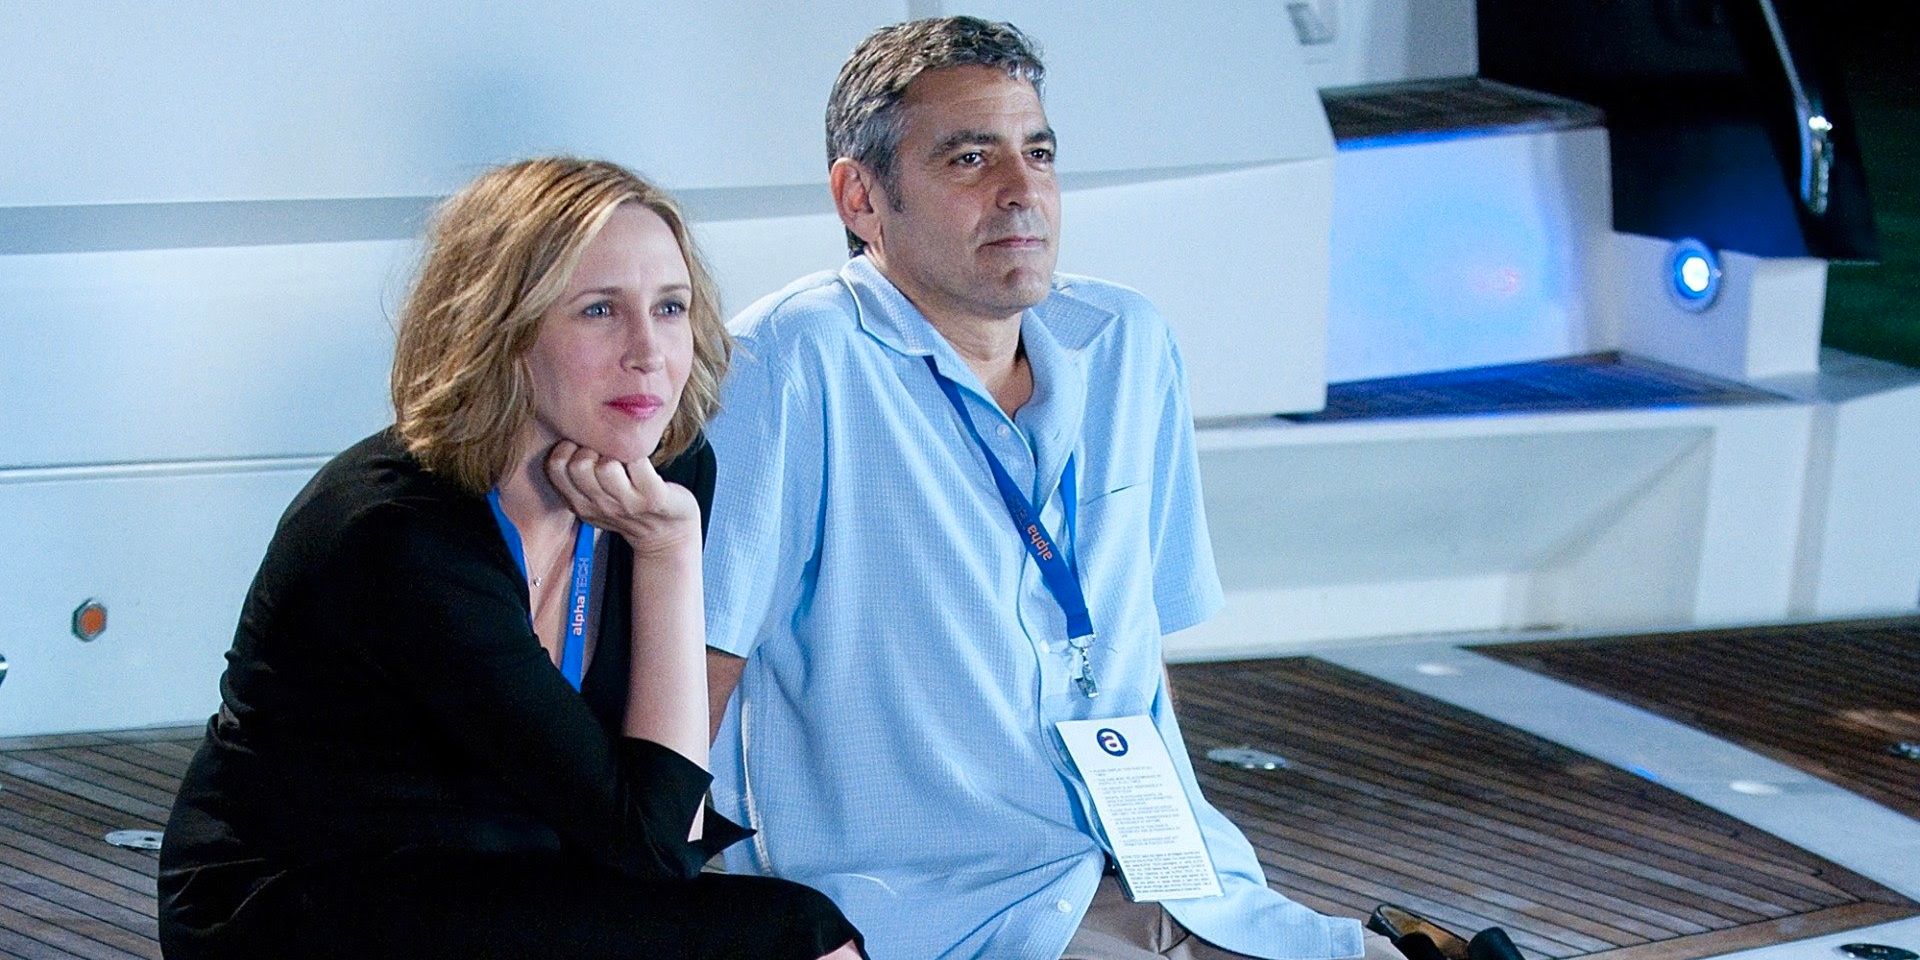 Vera Farmiga and George Clooney as Alex and Ryan sitting together on a boat during a convention.